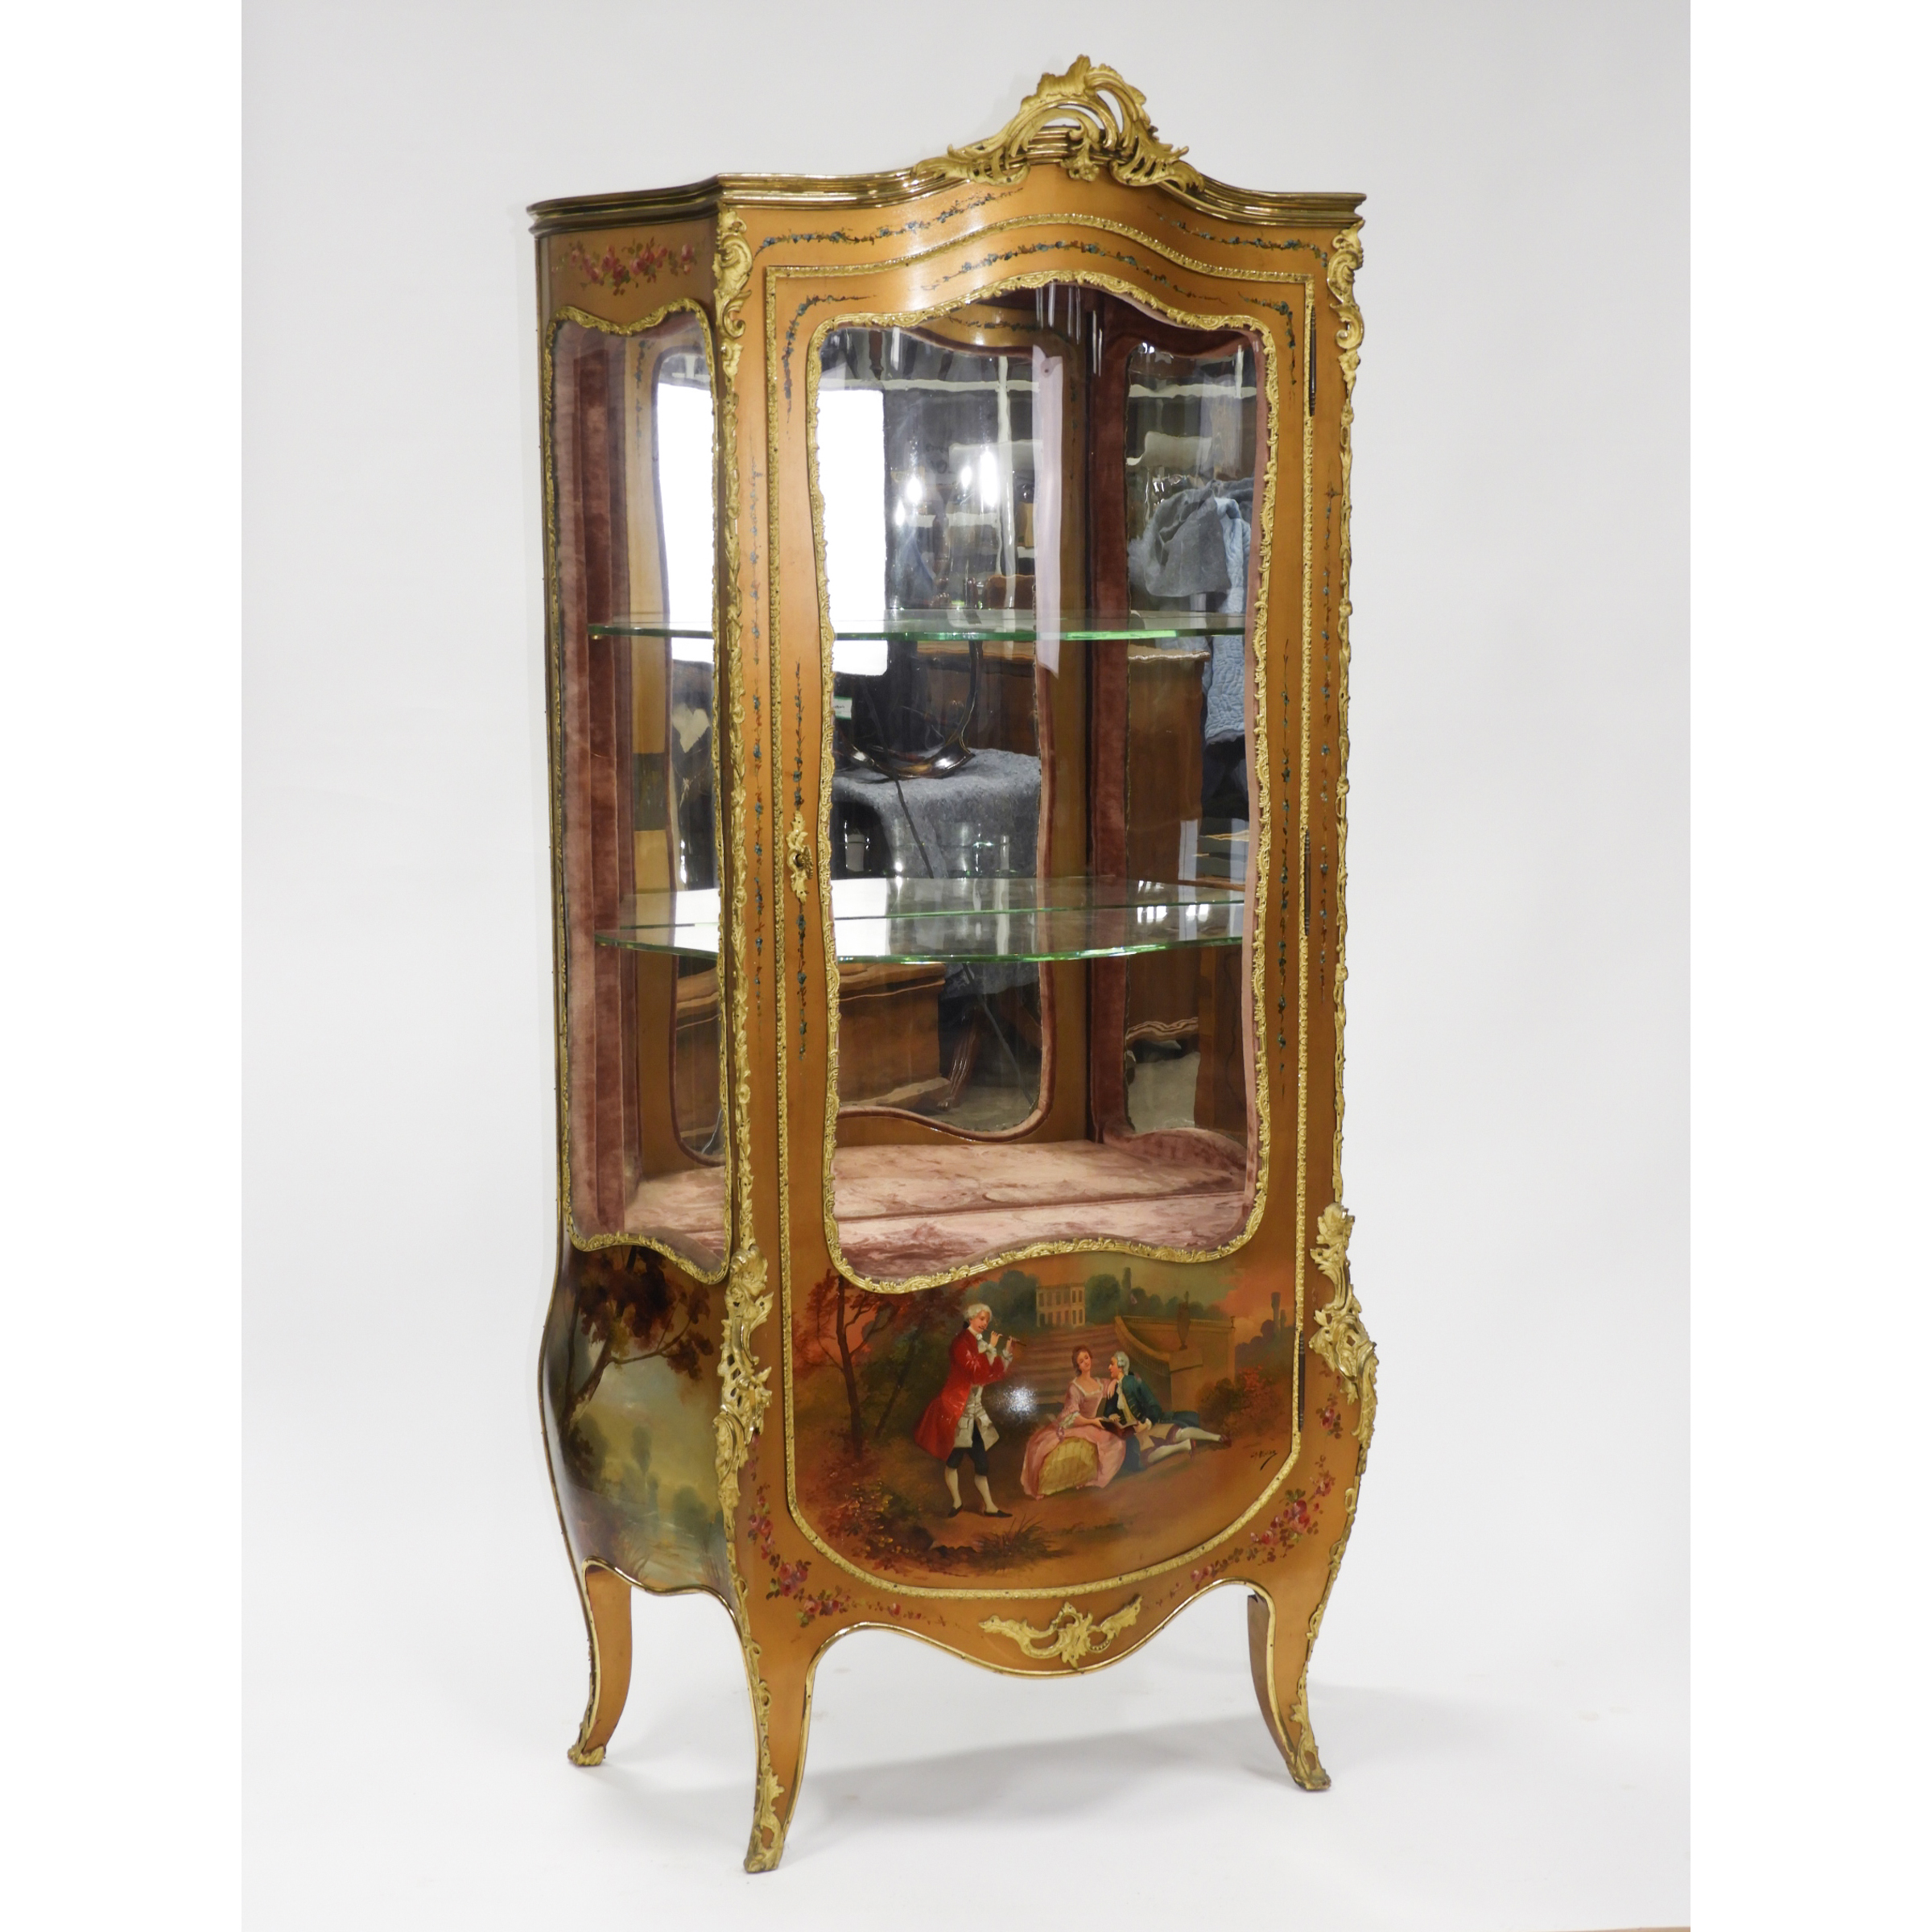 French Louis XV Style Ormolu Mounted and Painted Vitrine, early 19th century